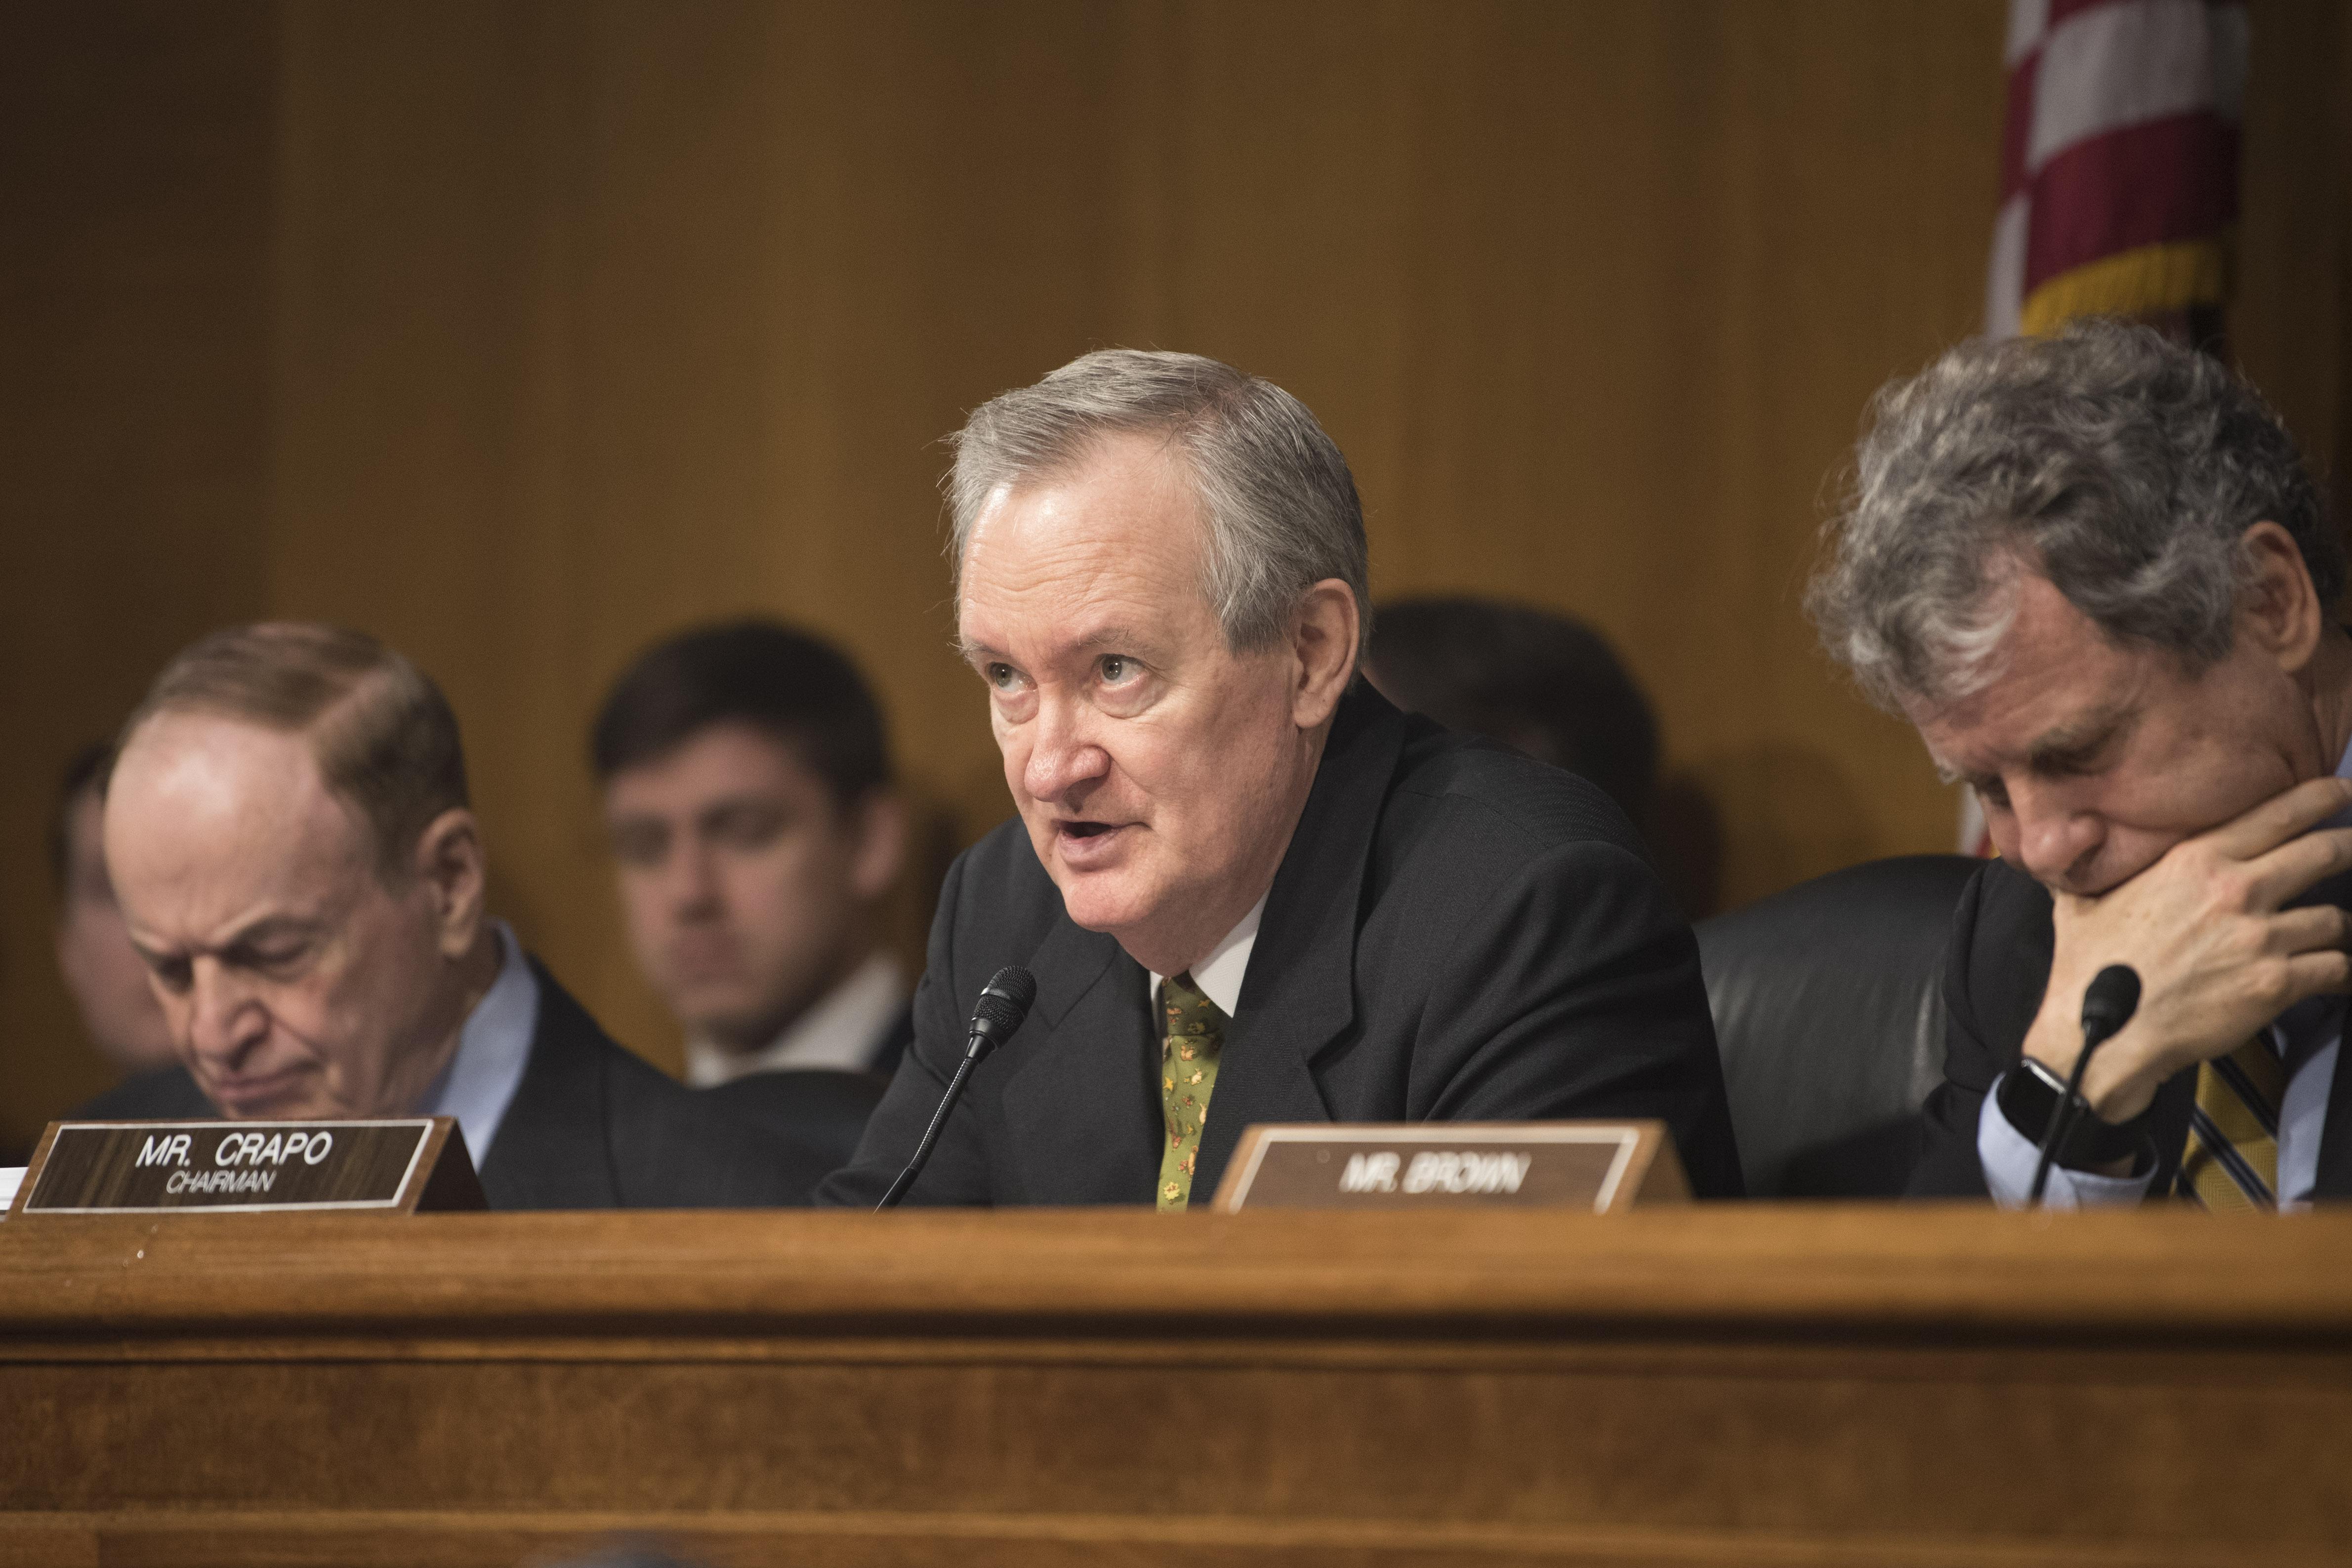 Bipartisan Election Security Bill Blocked By Senate Banking Chair